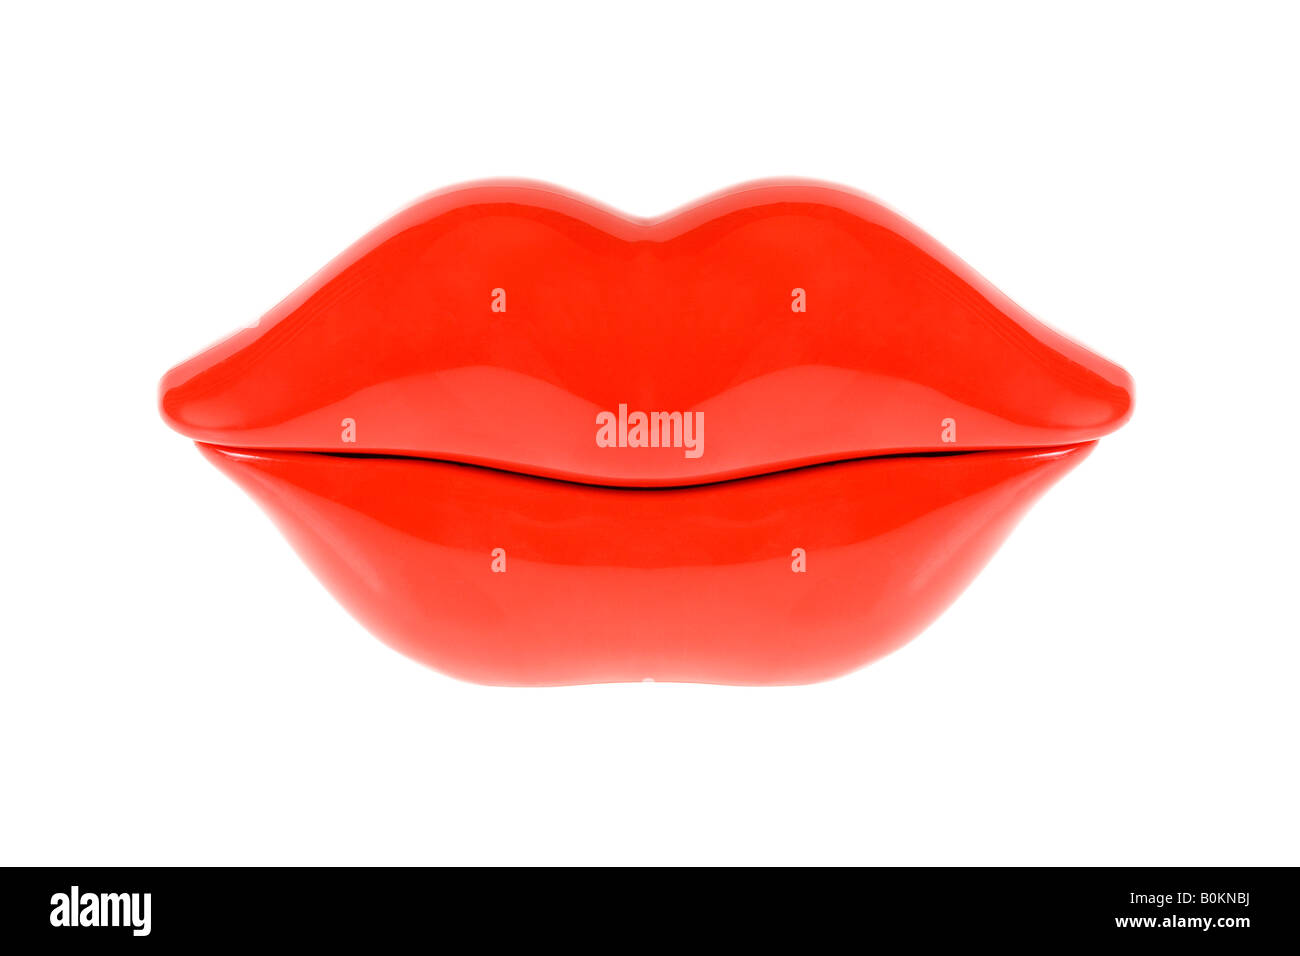 Shiny red lips on a pure white background. Stock Photo